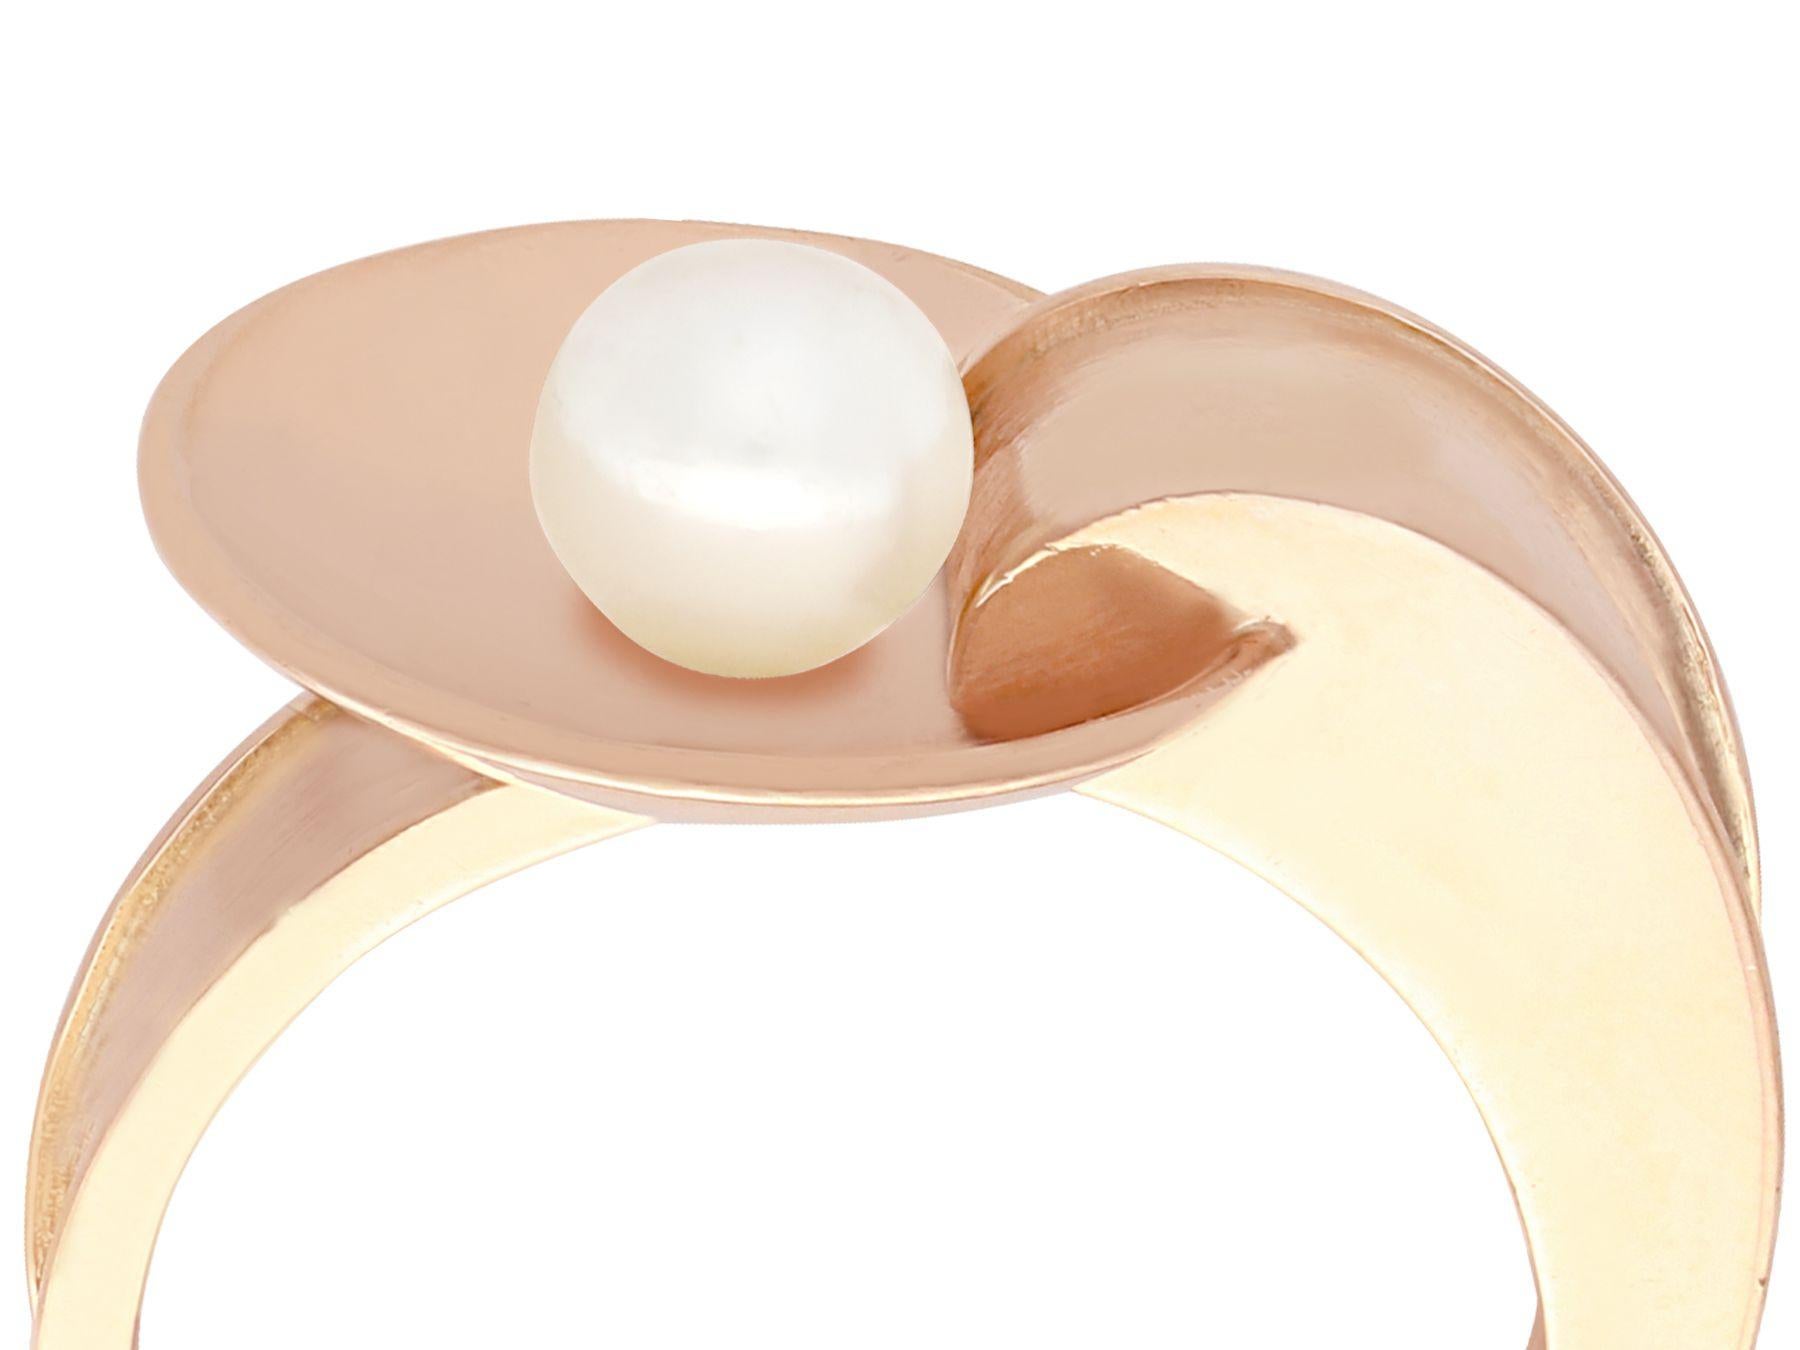 A fine and impressive vintage pearl and 14k rose gold cocktail ring; part of our diverse gemstone jewelry and estate jewelry collections.

This fine and impressive vintage pearl ring has been crafted in 14k rose gold.

The ring has an asymmetric